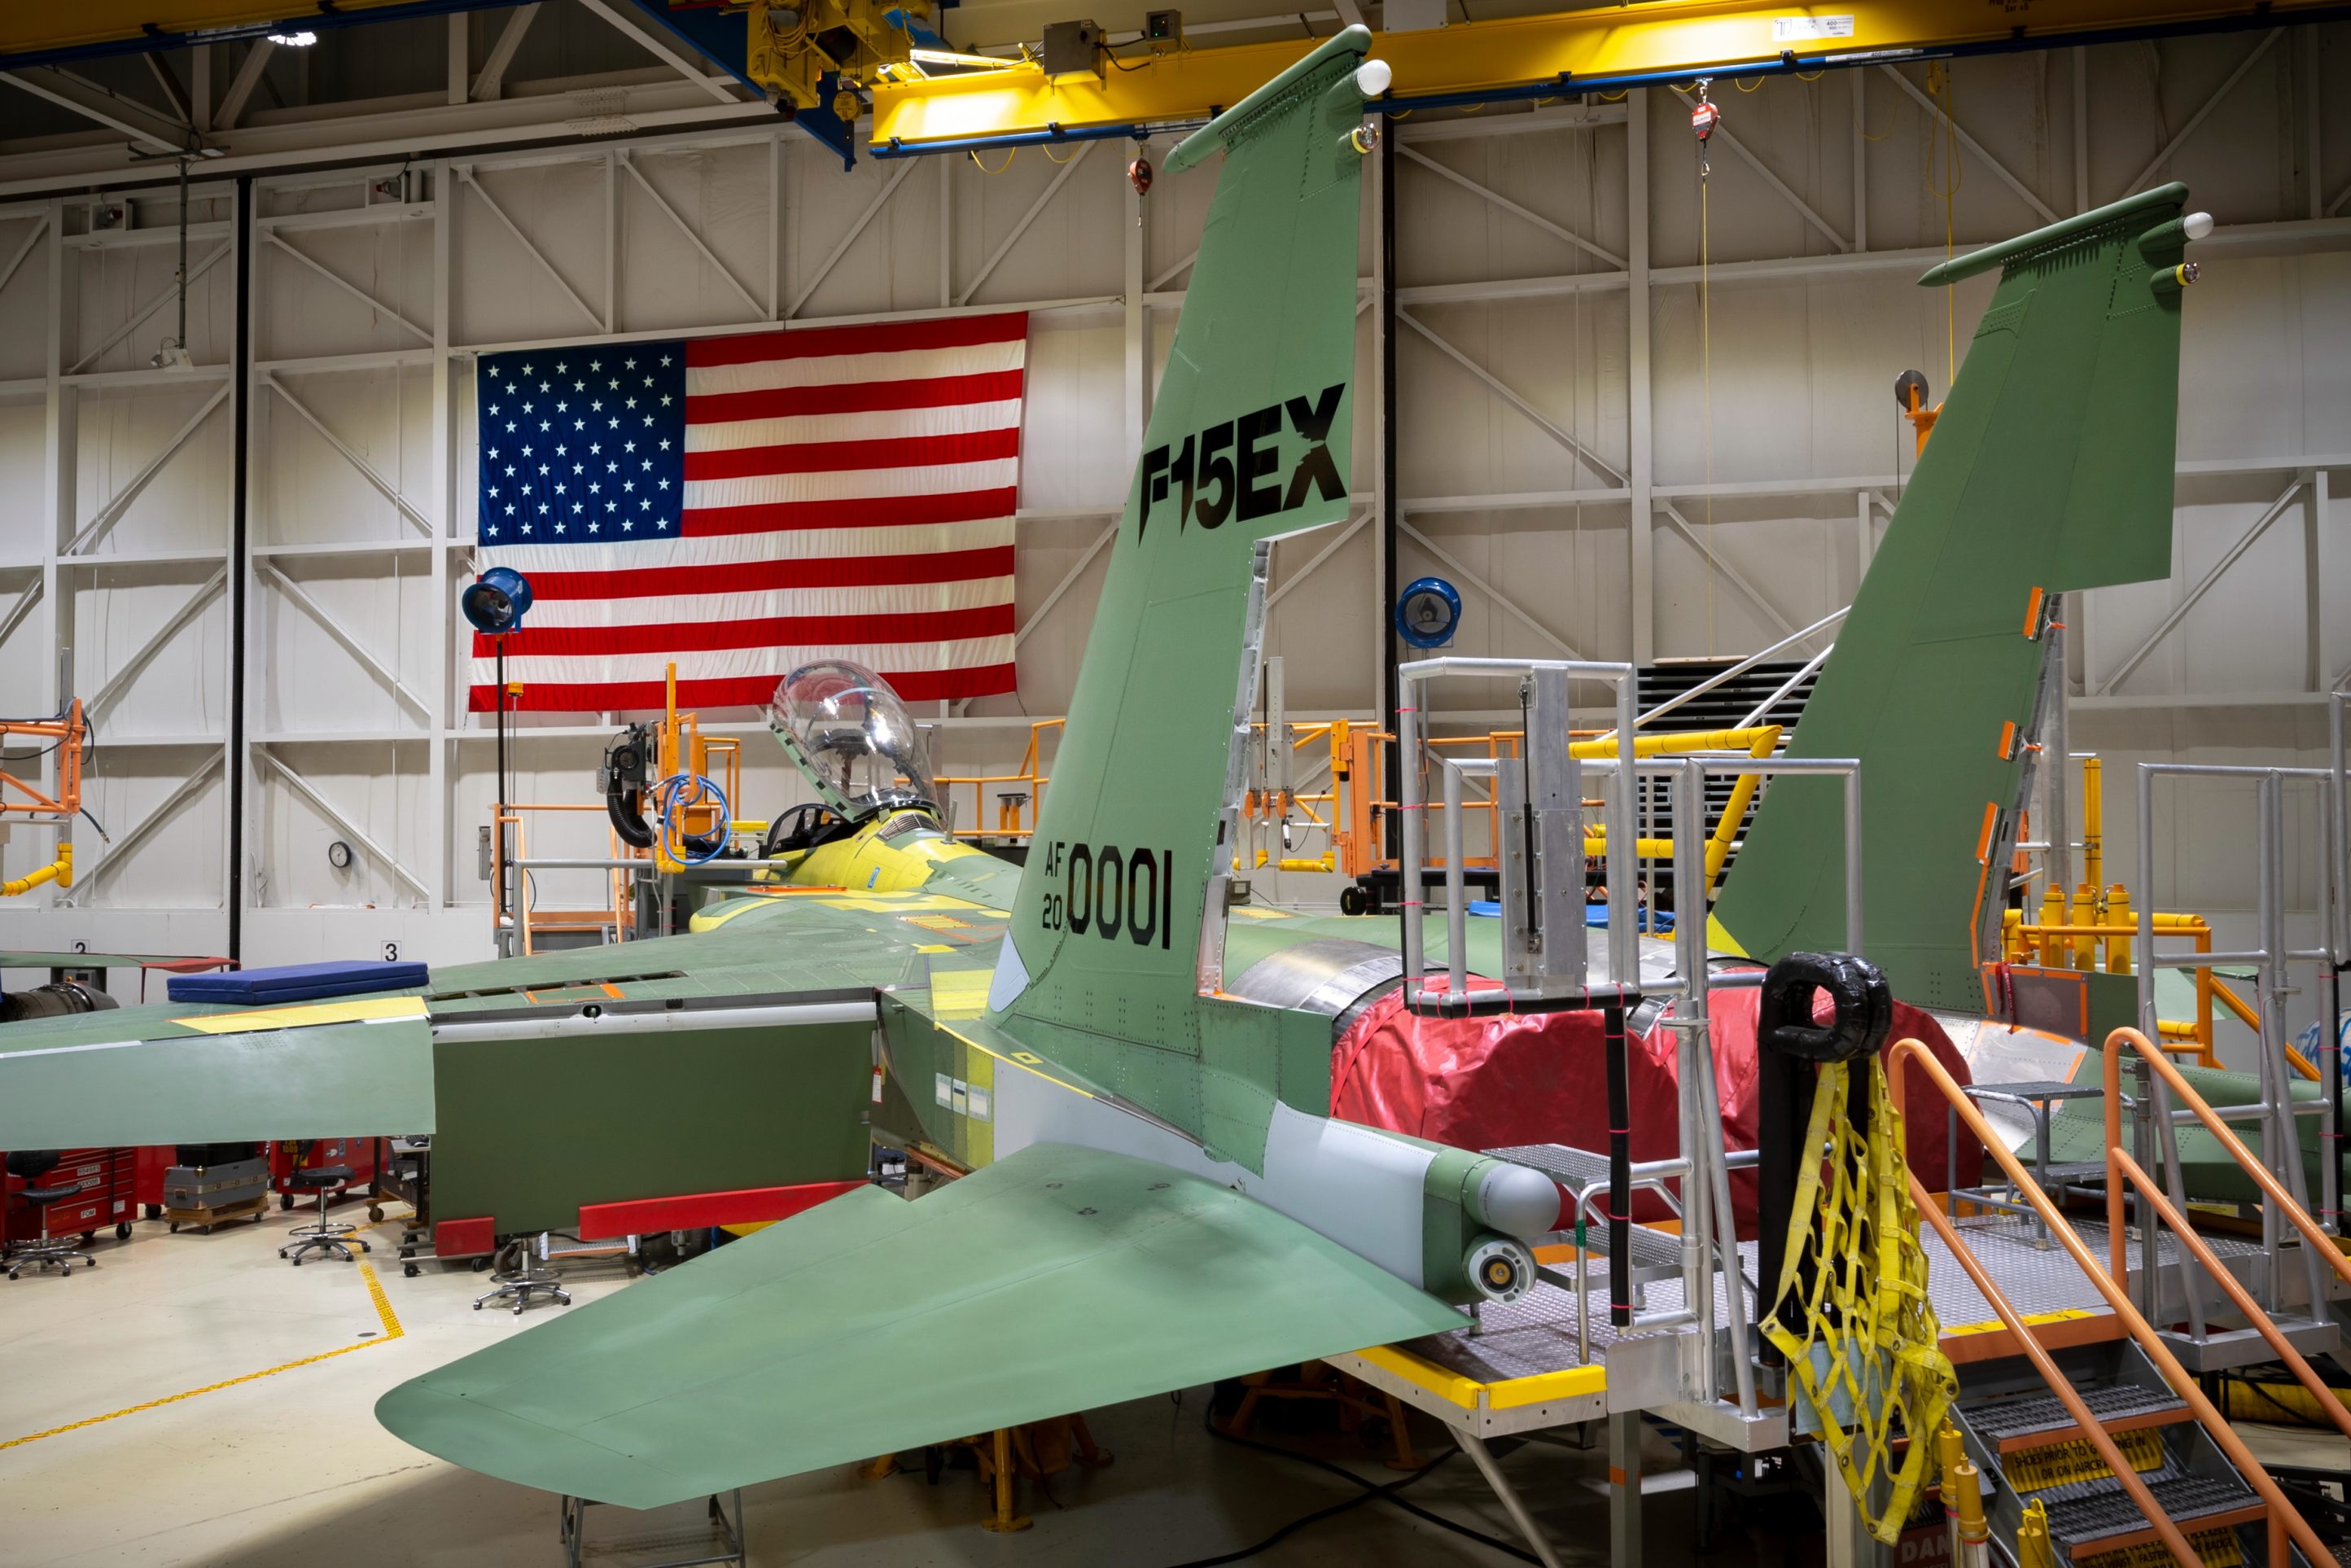 Already under construction at the Boeing F-15 production facility in St. Louis, the delivery of the first two F-15EX aircraft is scheduled for the second quarter of FY21. The remaining six F-15EXs are scheduled to be delivered in FY23. Click to enlarge.